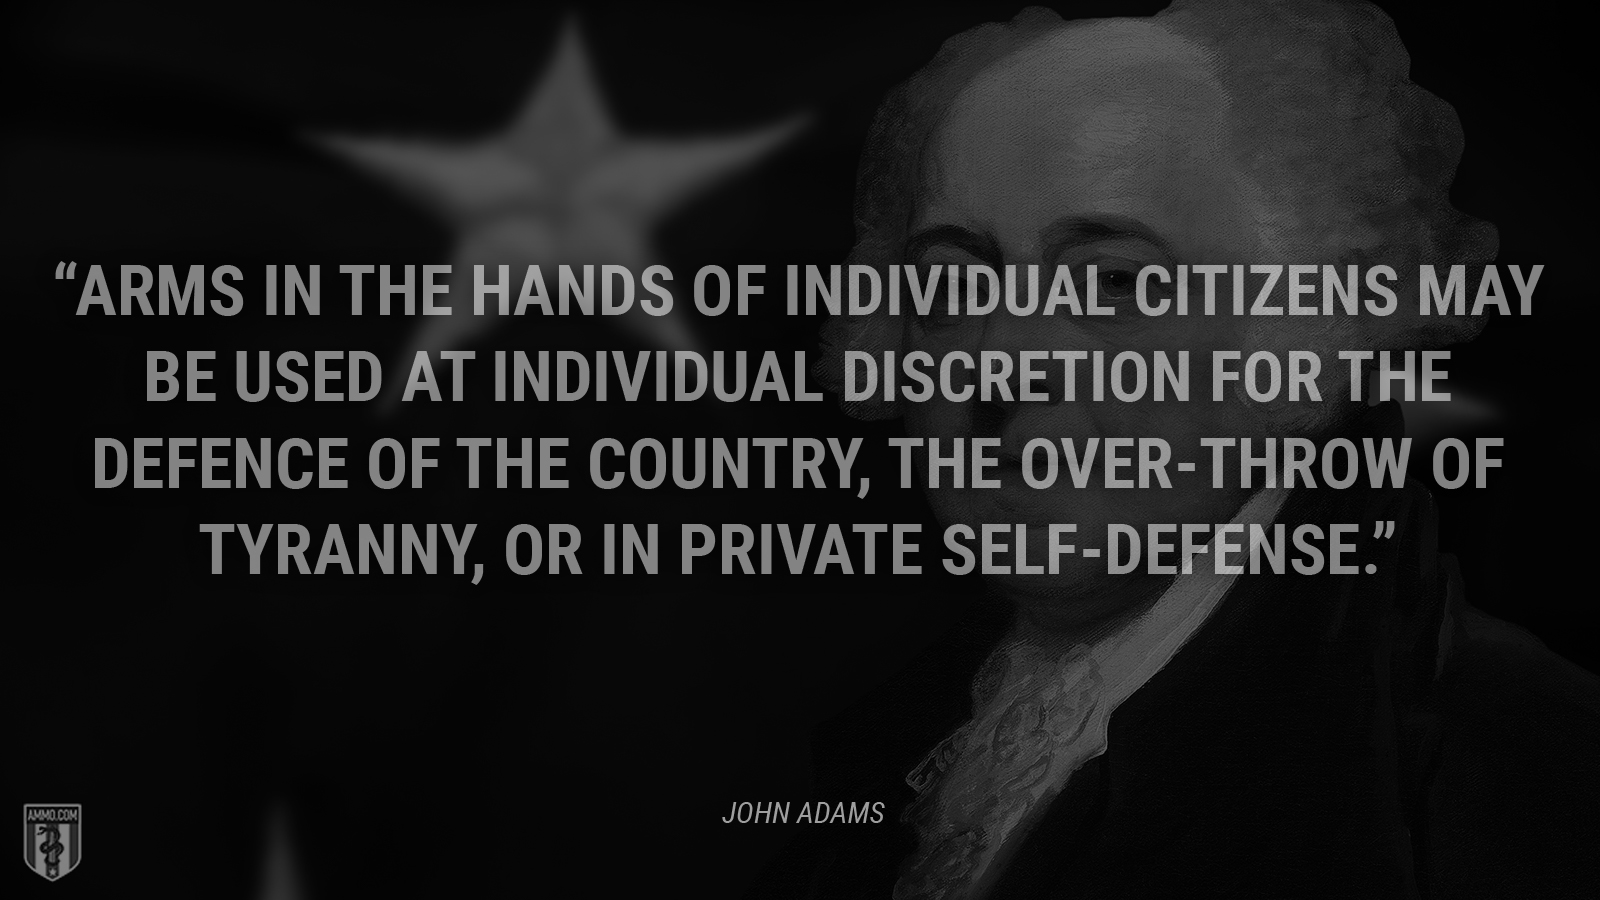 “Arms in the hands of individual citizens may be used at individual discretion for the defence of the country, the over-throw of tyranny, or in private self-defense.” - John Adams